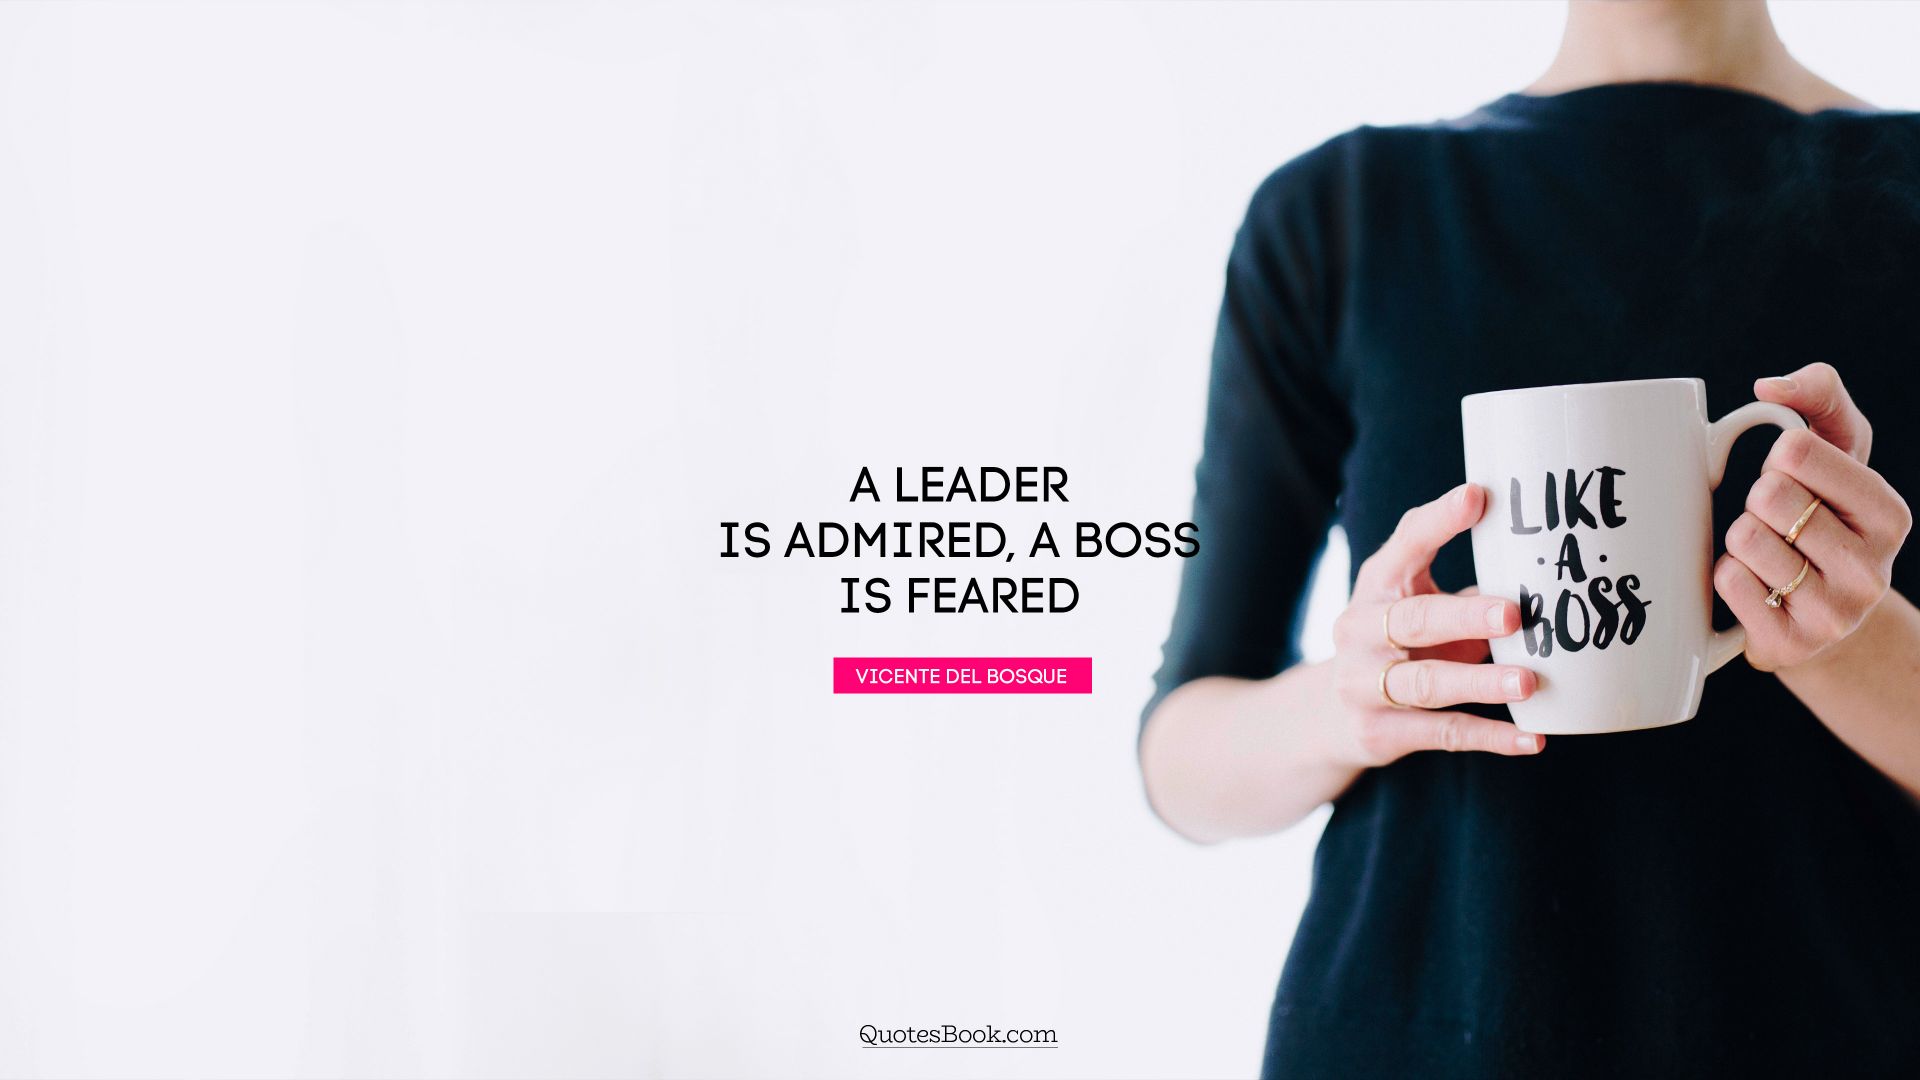 A leader is admired, a boss is feared. - Quote by Vicente del Bosque